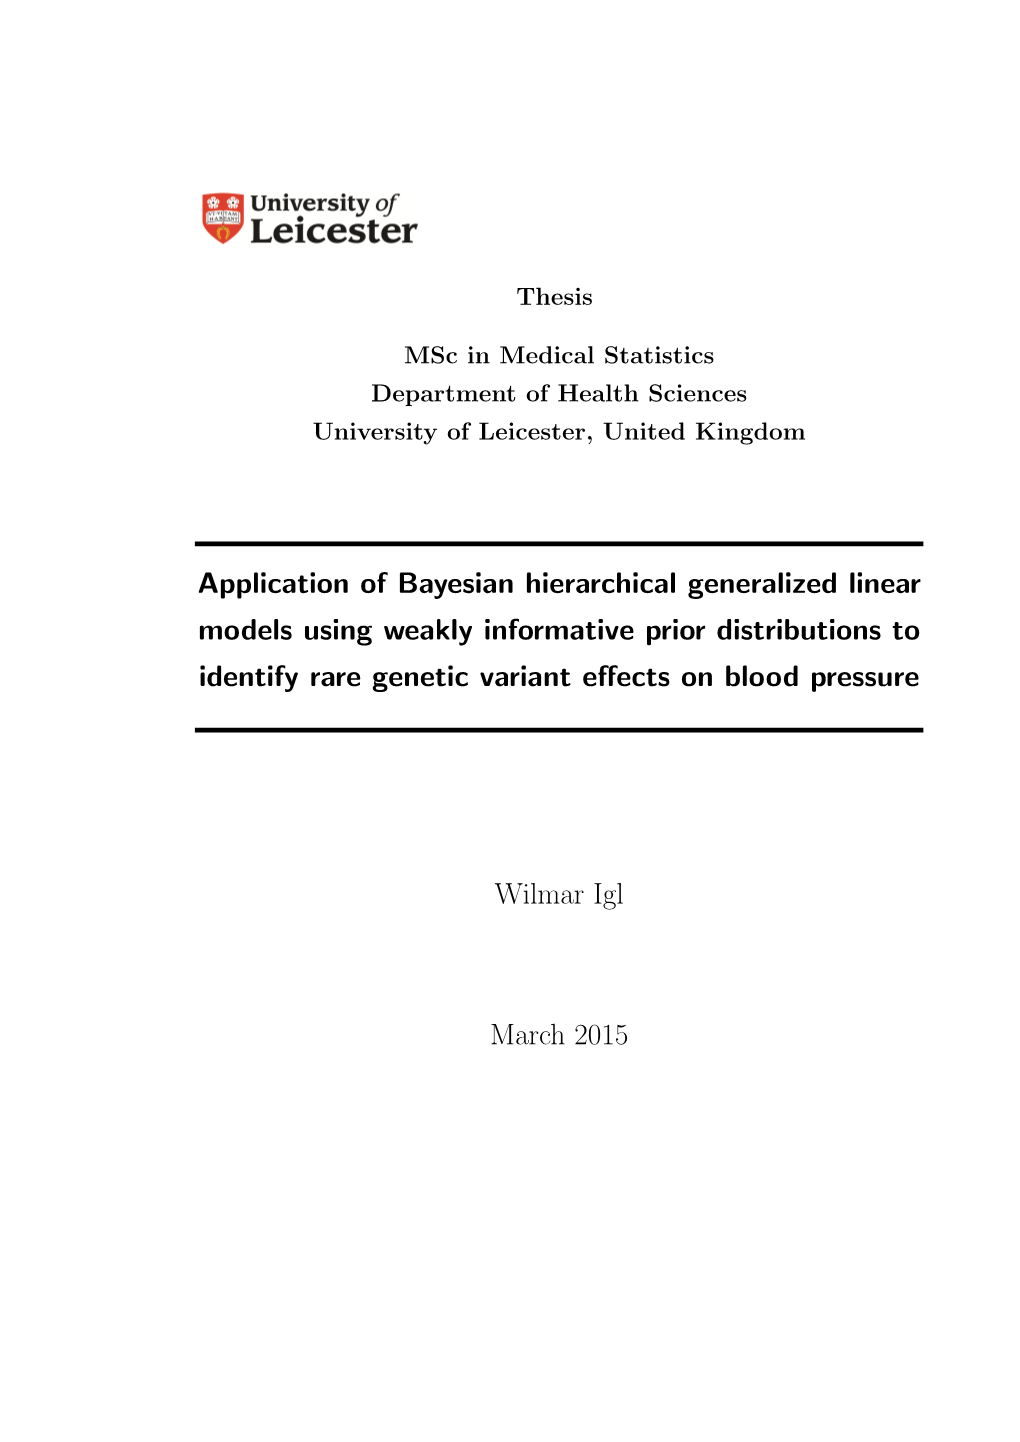 University of Leicester, Msc Medical Statistics, Thesis, Wilmar